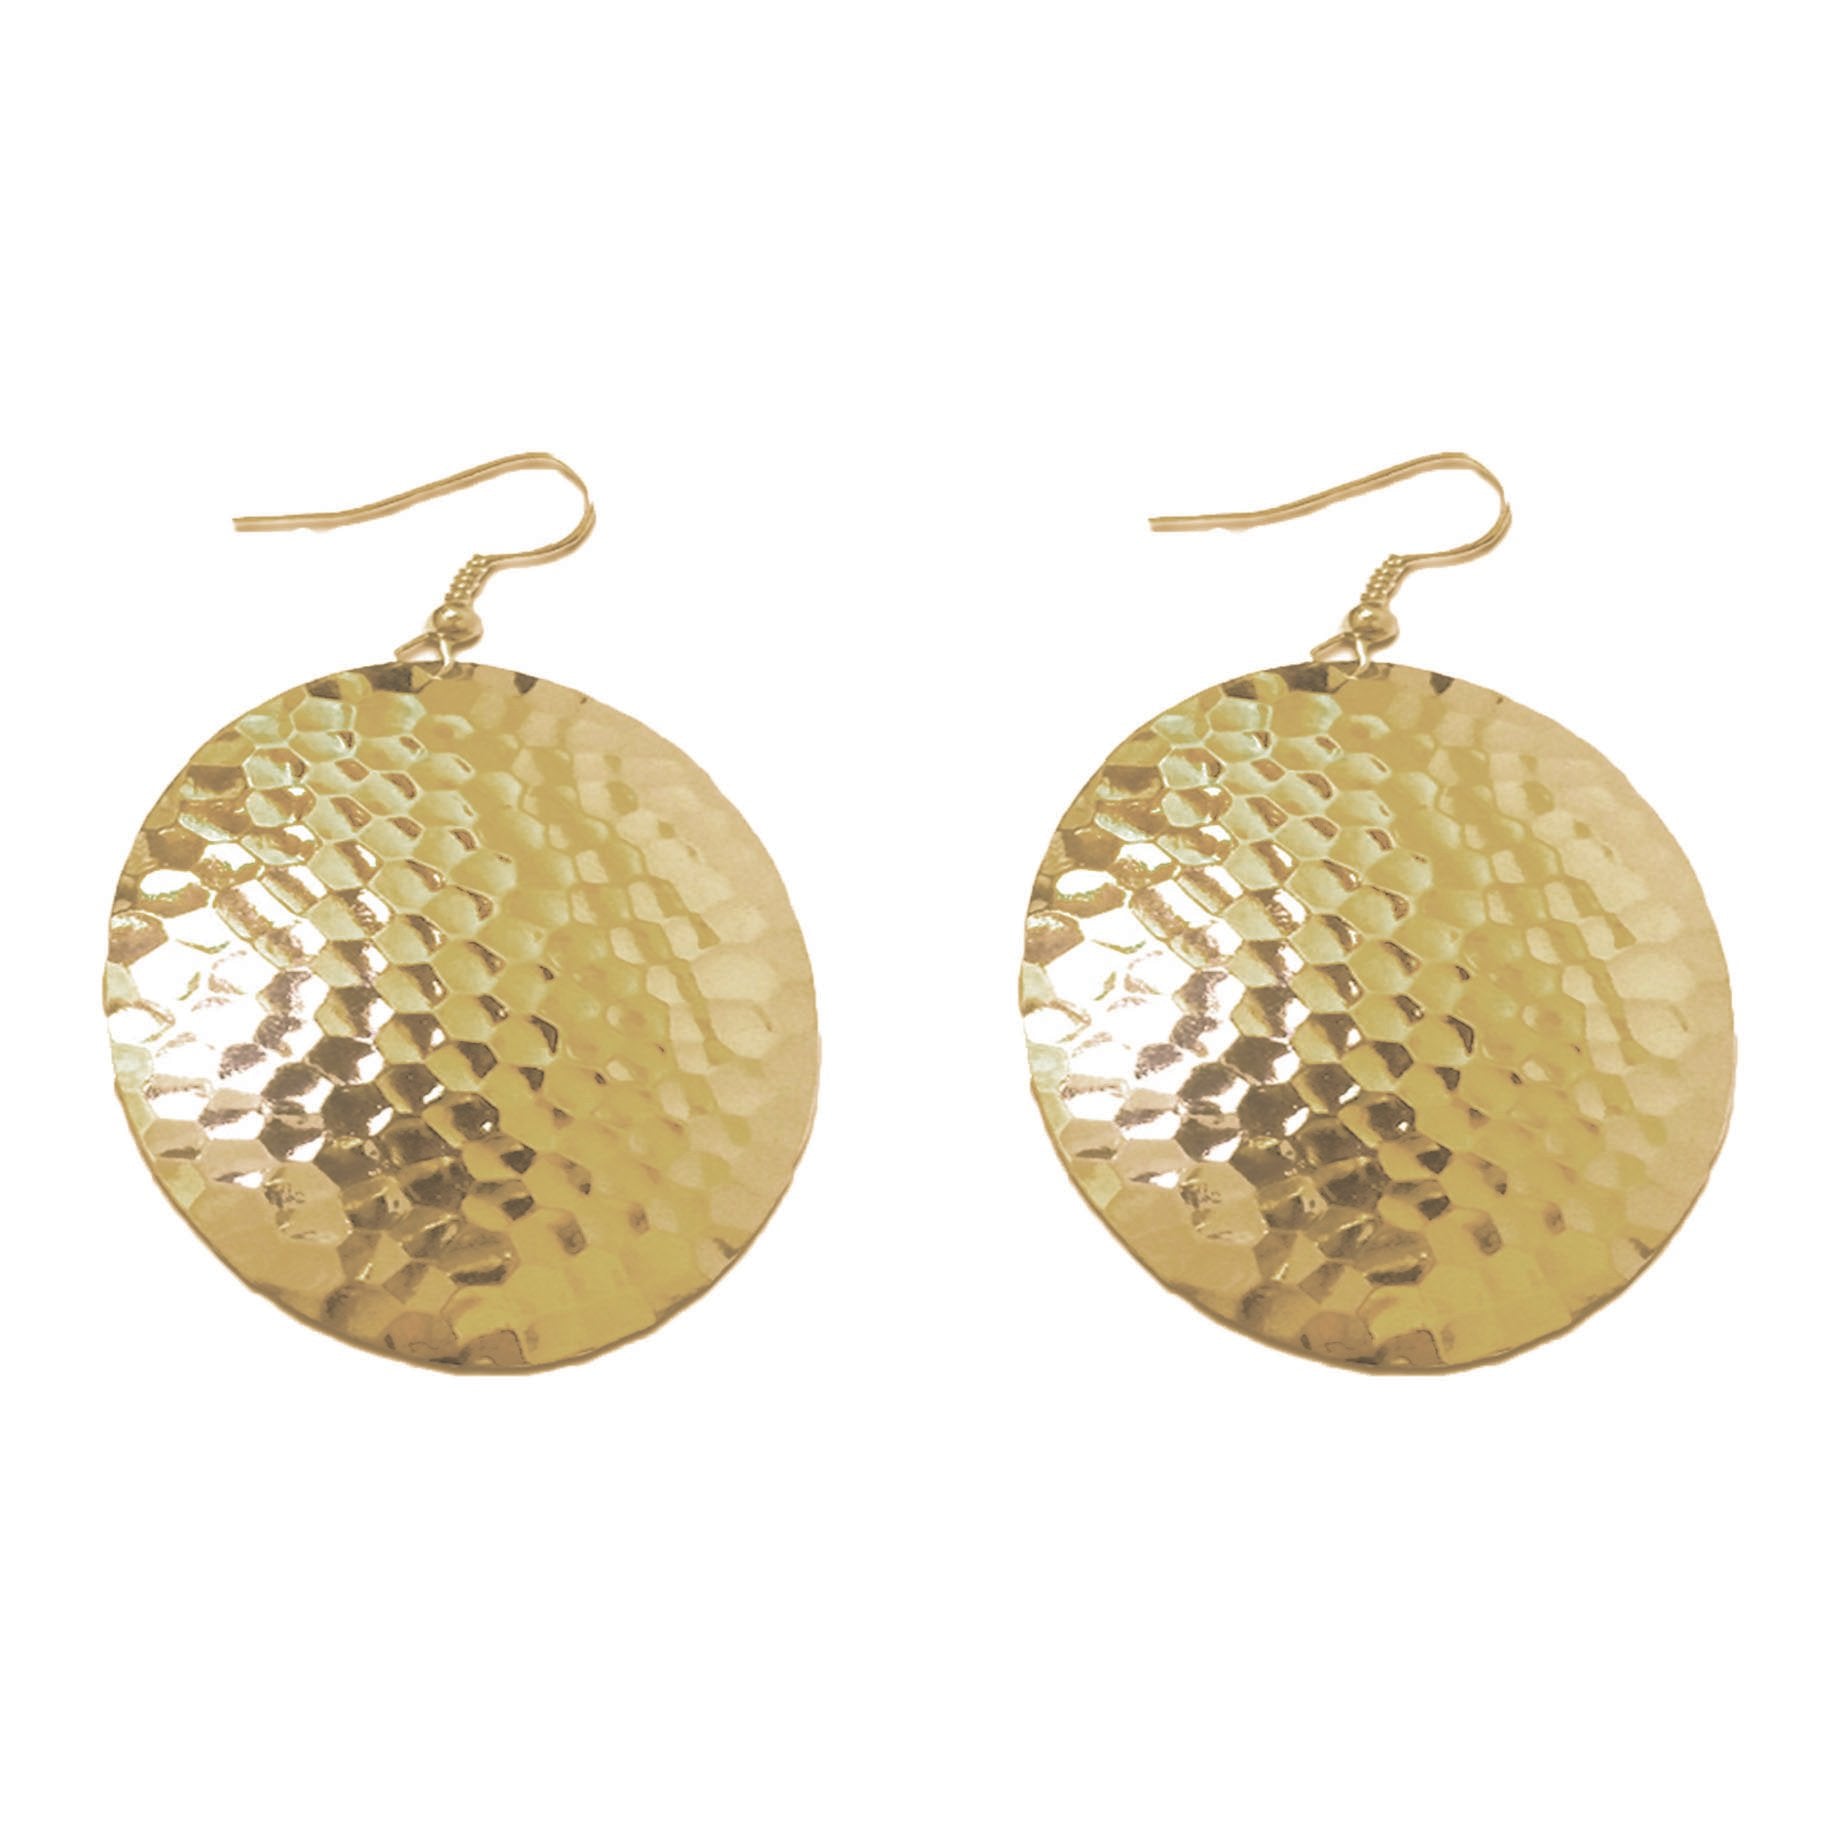 Hammered Circle Earrings | Gold or Silver Dipped